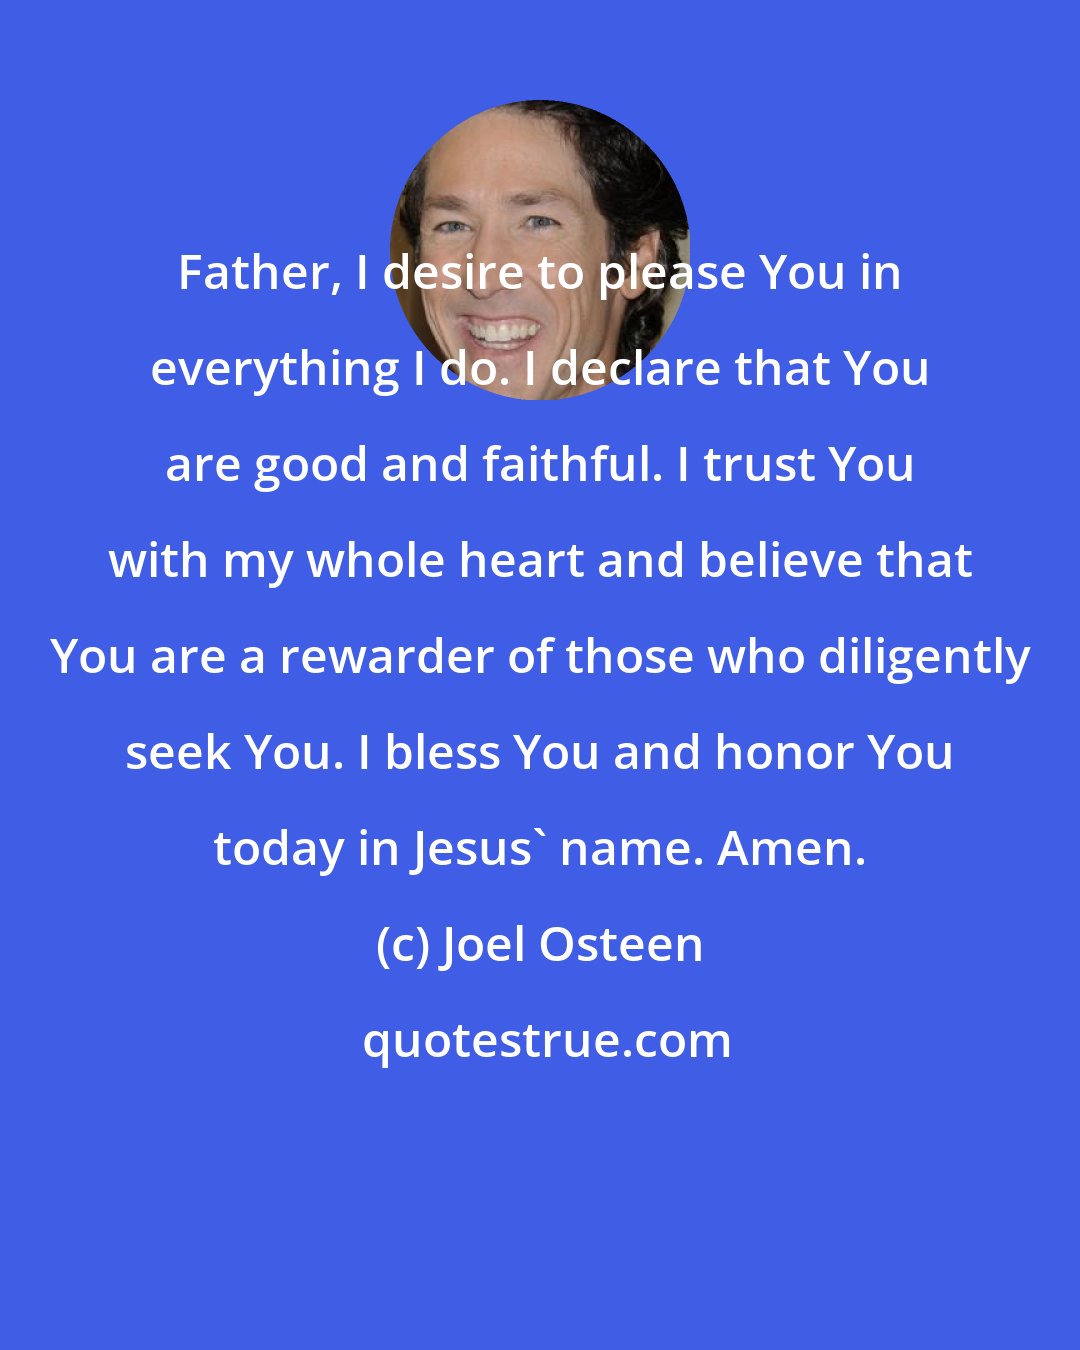 Joel Osteen: Father, I desire to please You in everything I do. I declare that You are good and faithful. I trust You with my whole heart and believe that You are a rewarder of those who diligently seek You. I bless You and honor You today in Jesus' name. Amen.